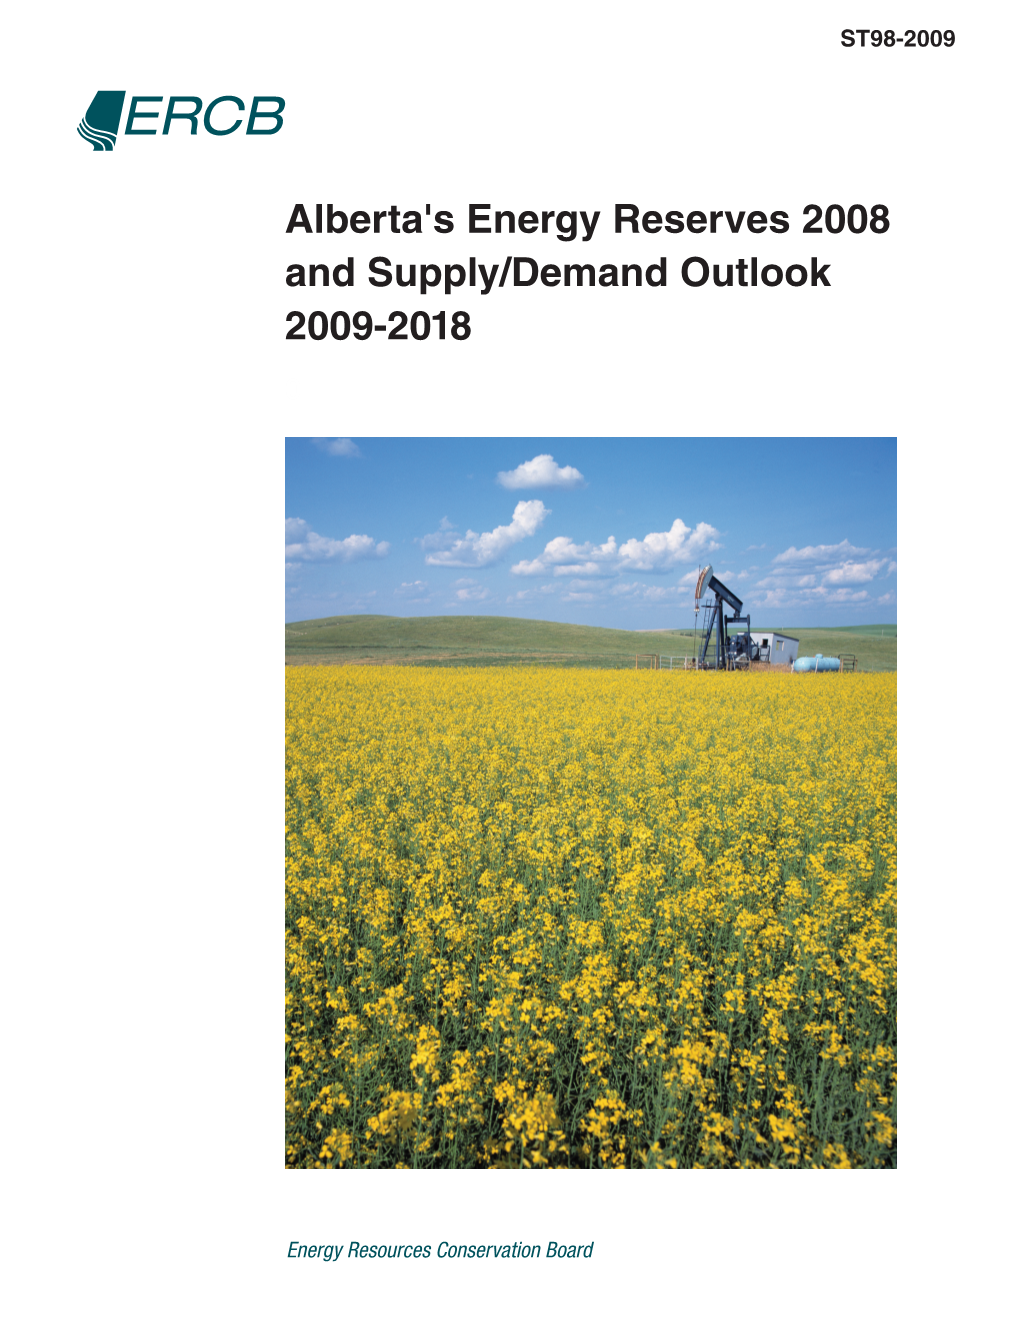 Alberta's Energy Reserves 2008 and Supply/Demand Outlook 2009-2018 0